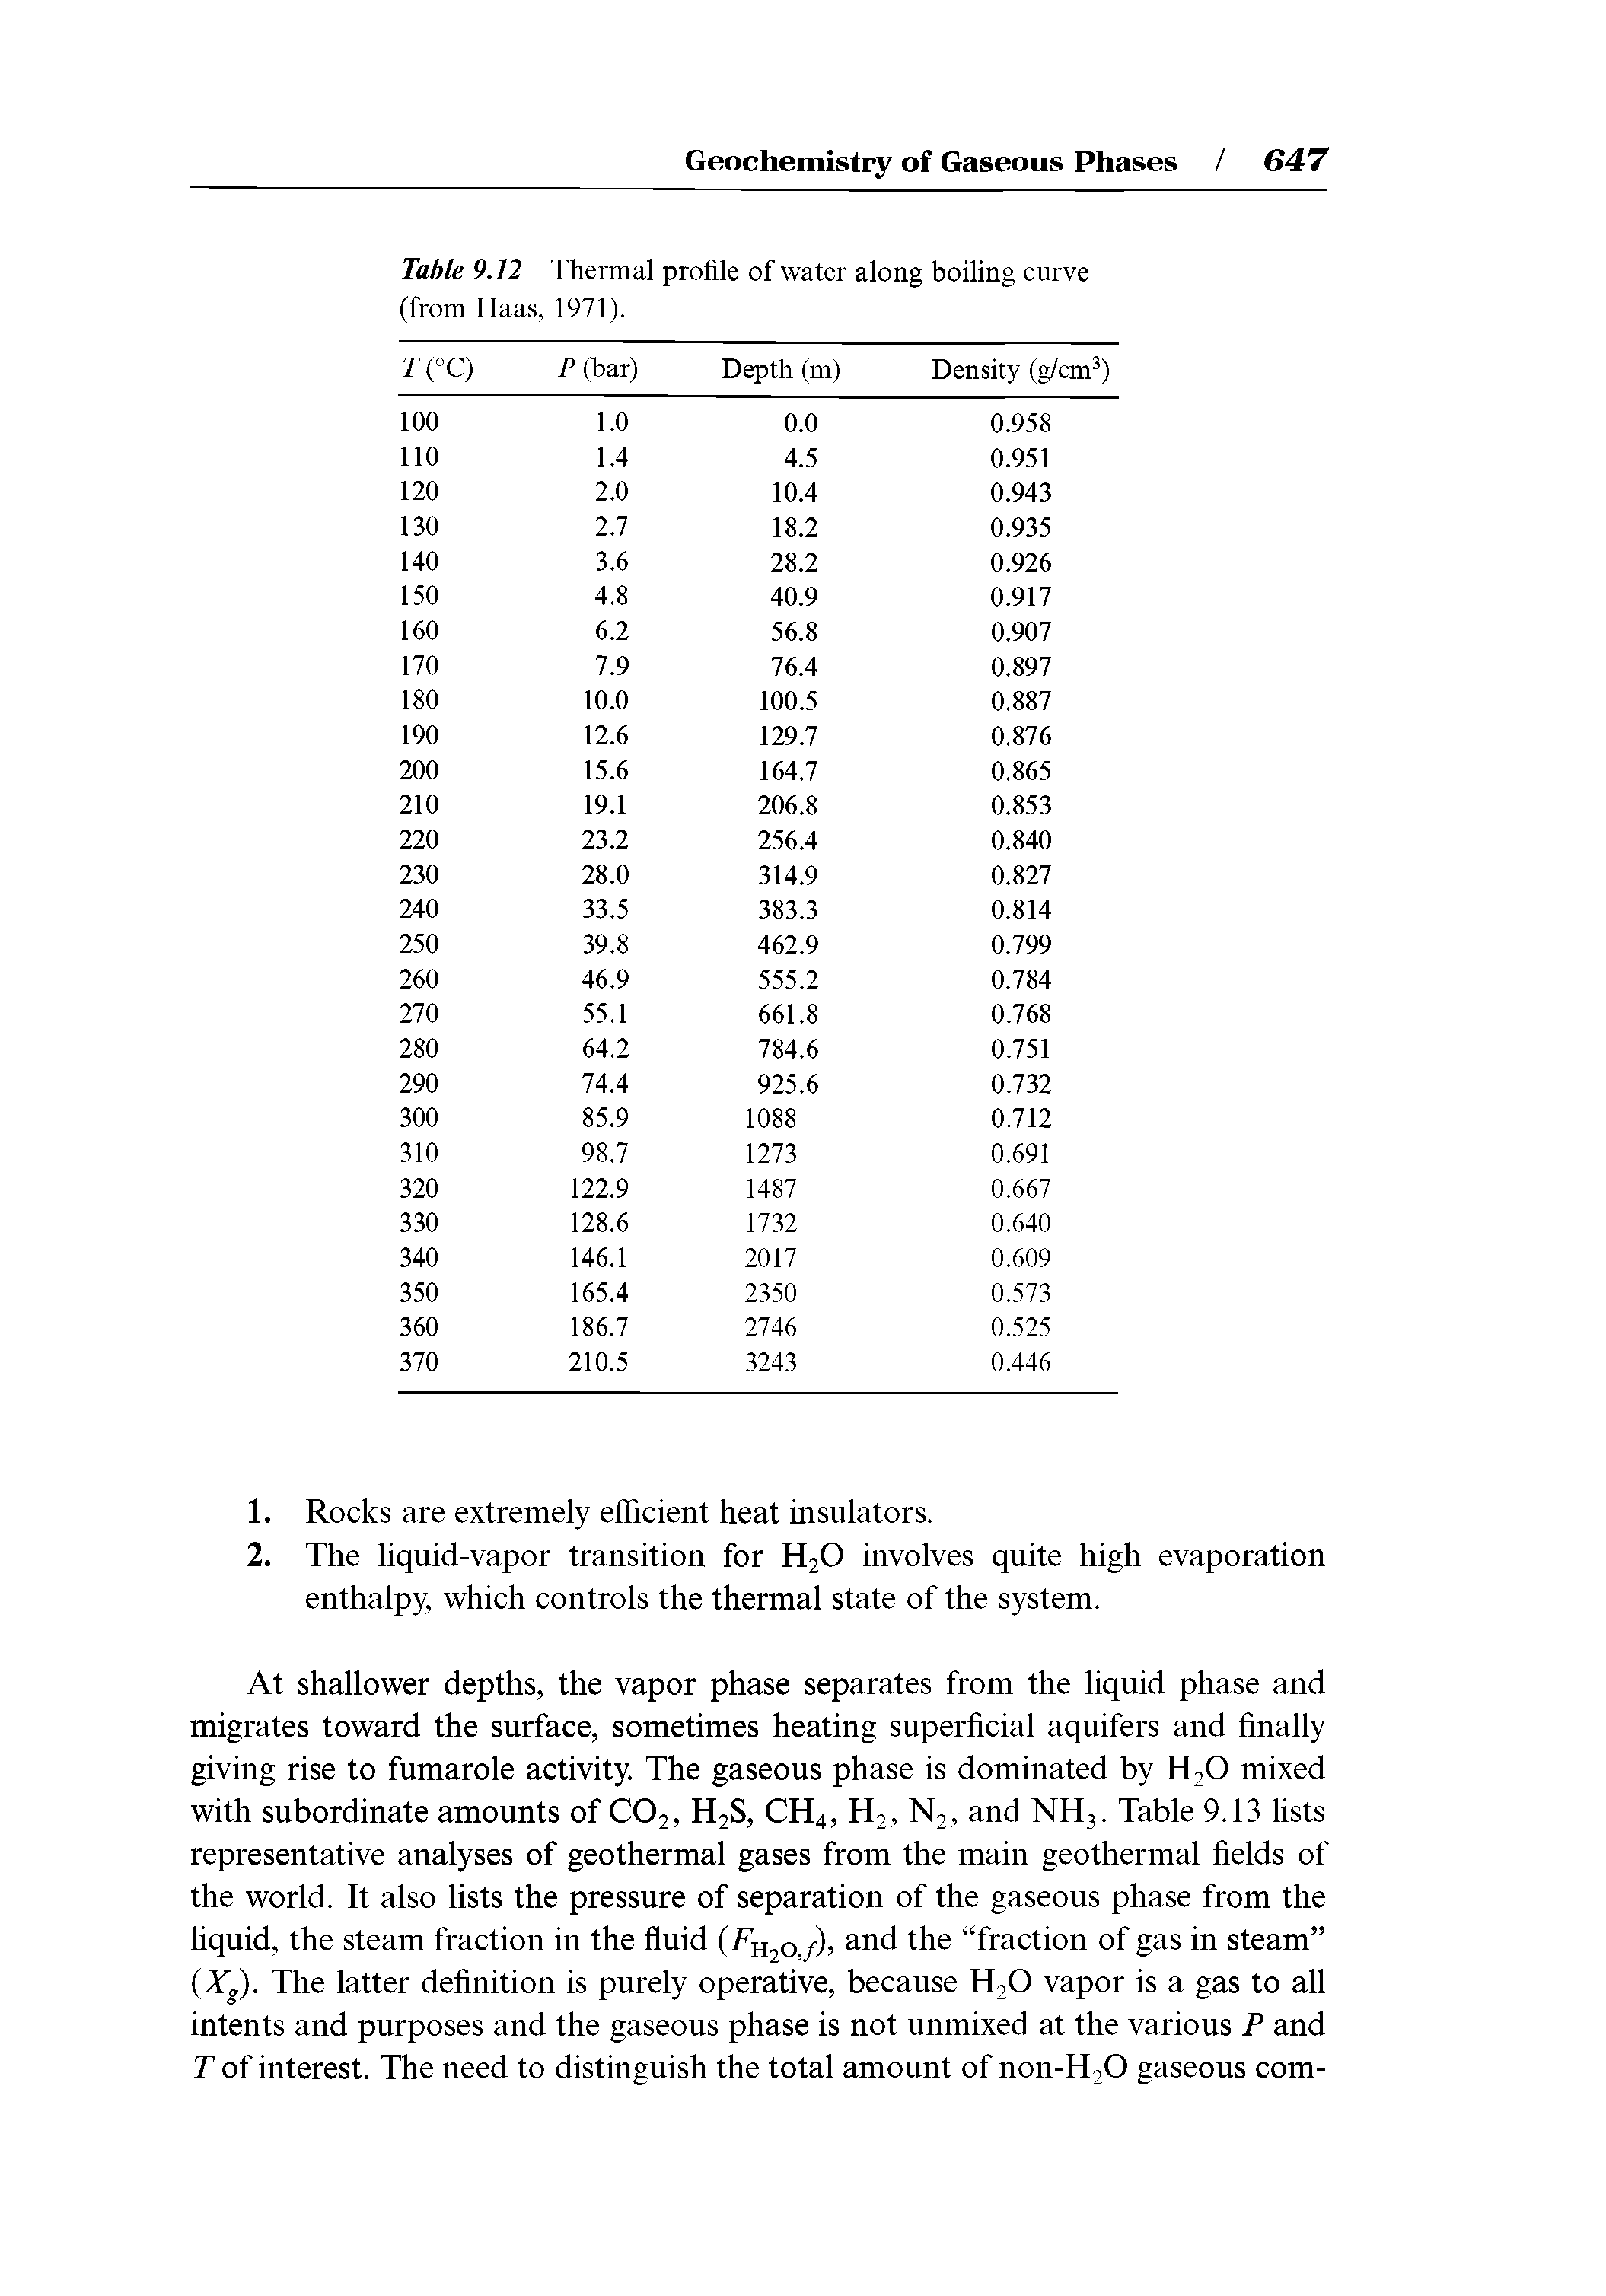 Table 9.12 Thermal profile of water along boiling curve (from Haas, 1971).